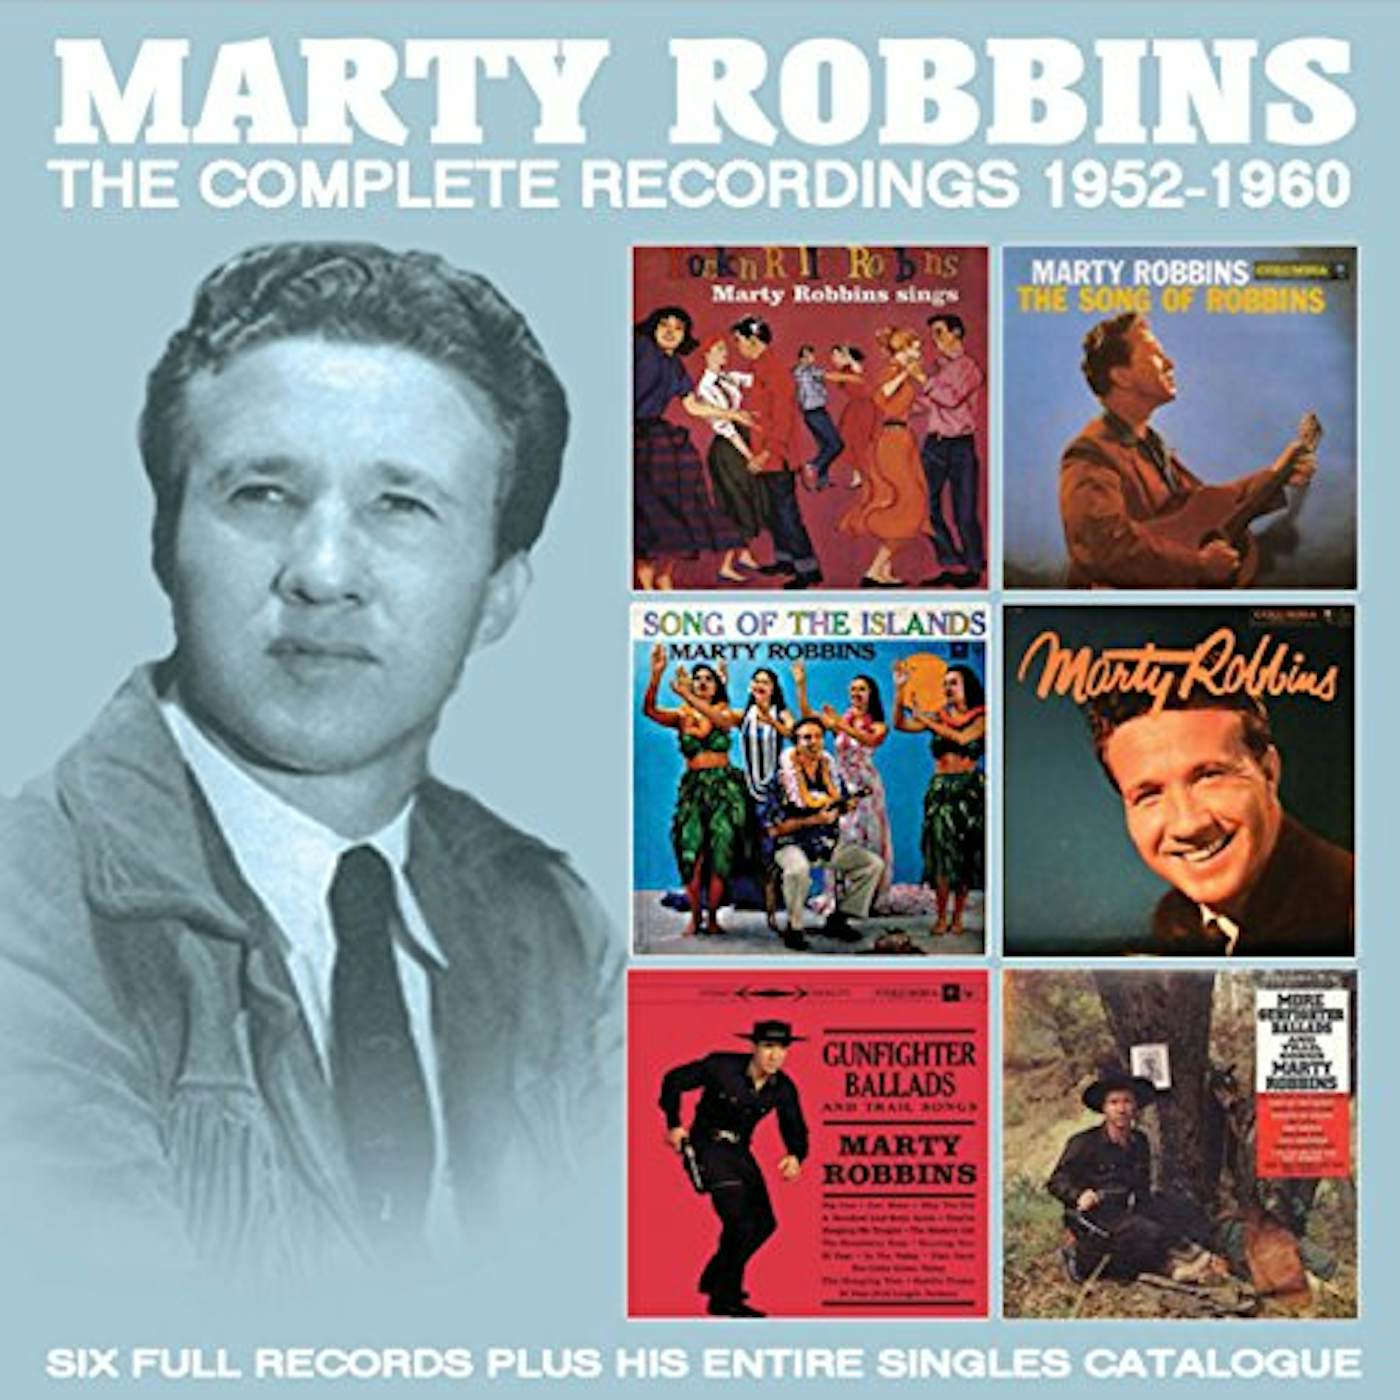 Marty Robbins COMPLETE RECORDINGS: 1952-1960 CD